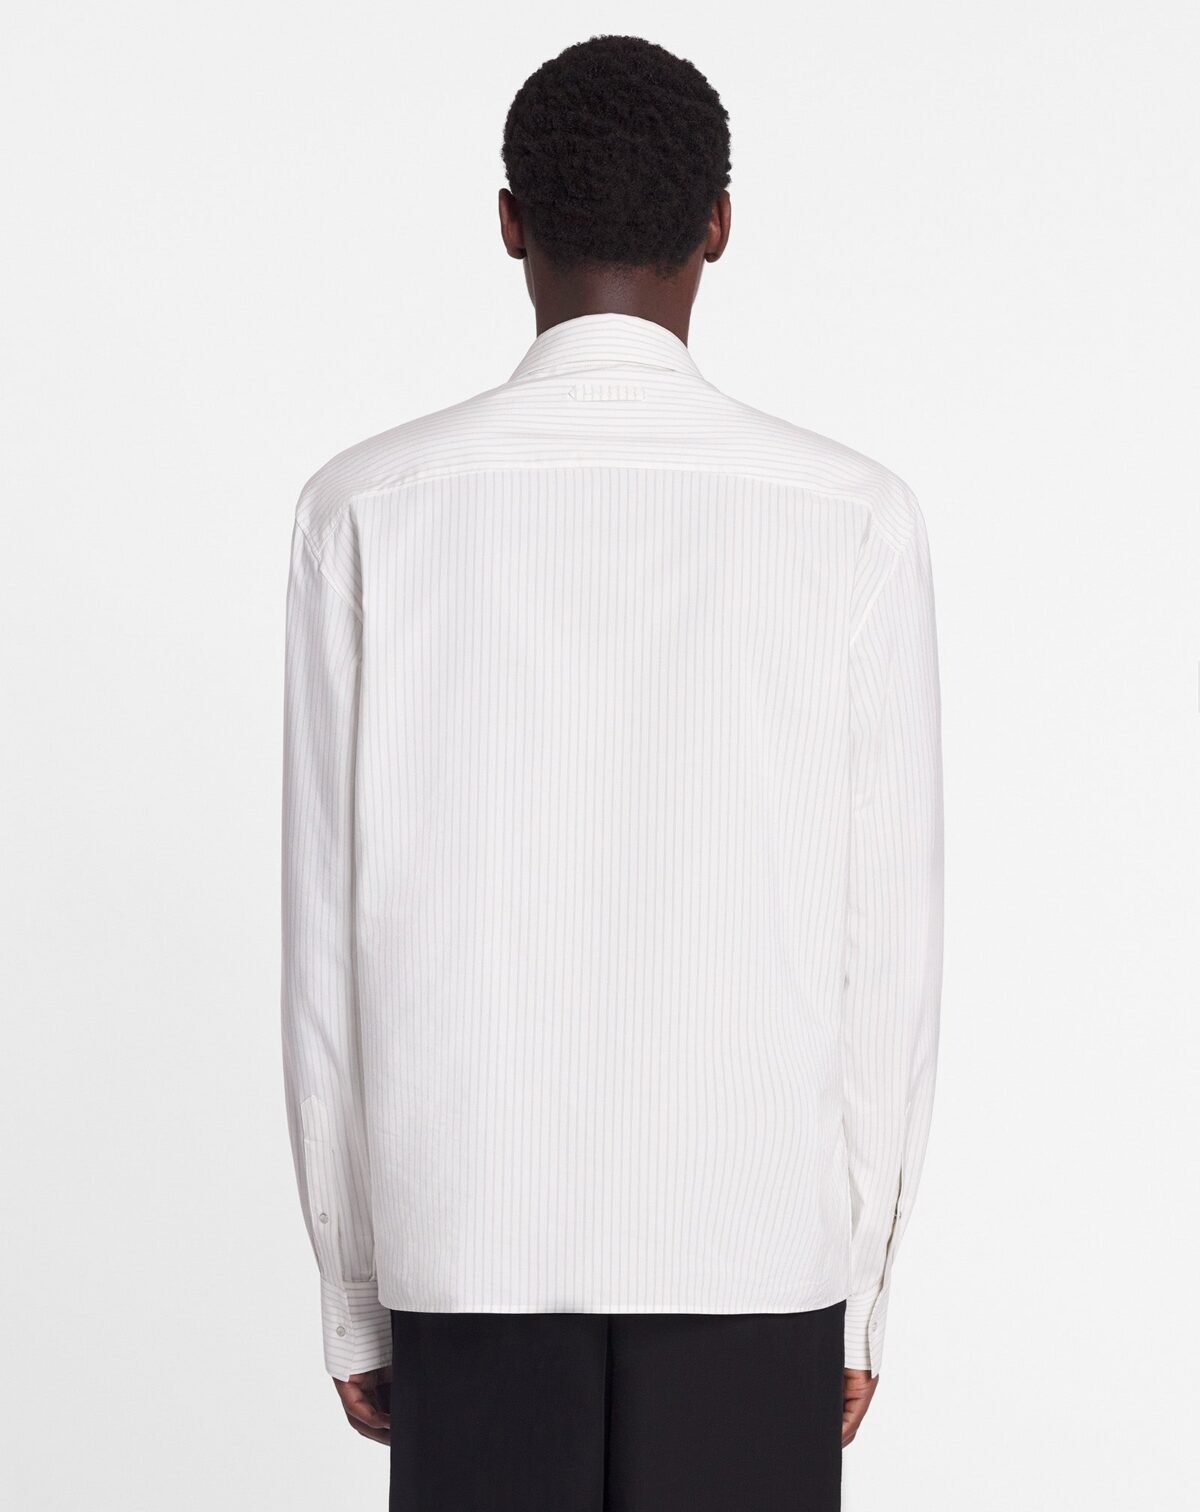 LONG-SLEEVED SHIRT WITH GUSSET